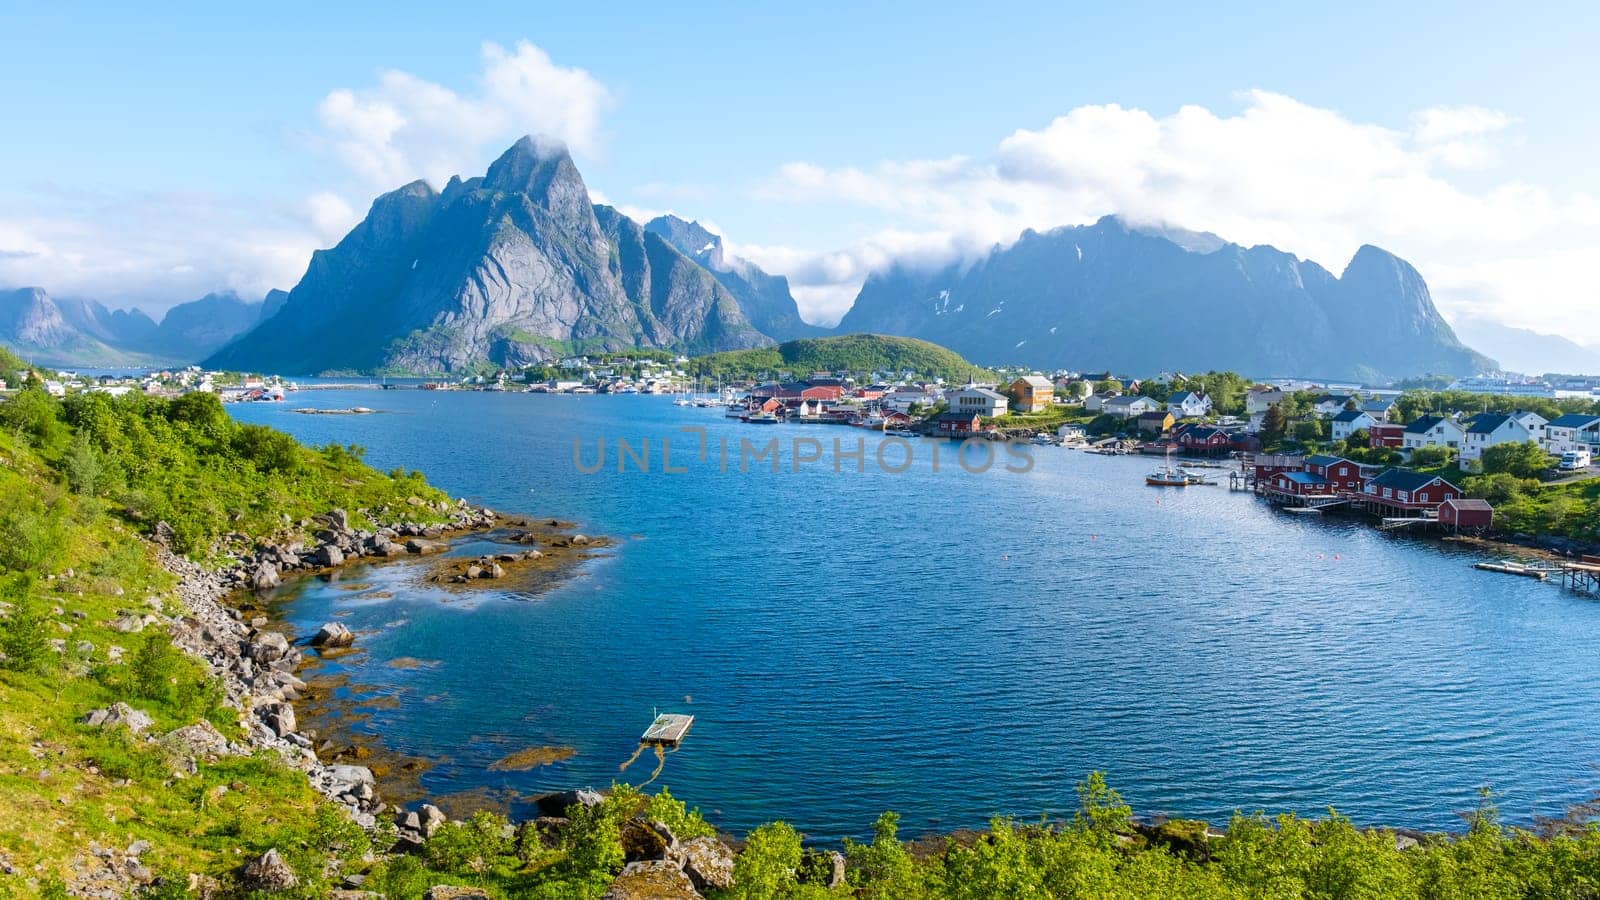 Norwegian fjord view with mountains, calm waters, and a quaint village. The scenery embodies the beauty and serenity of Norway. Reine, Lofoten, Norway